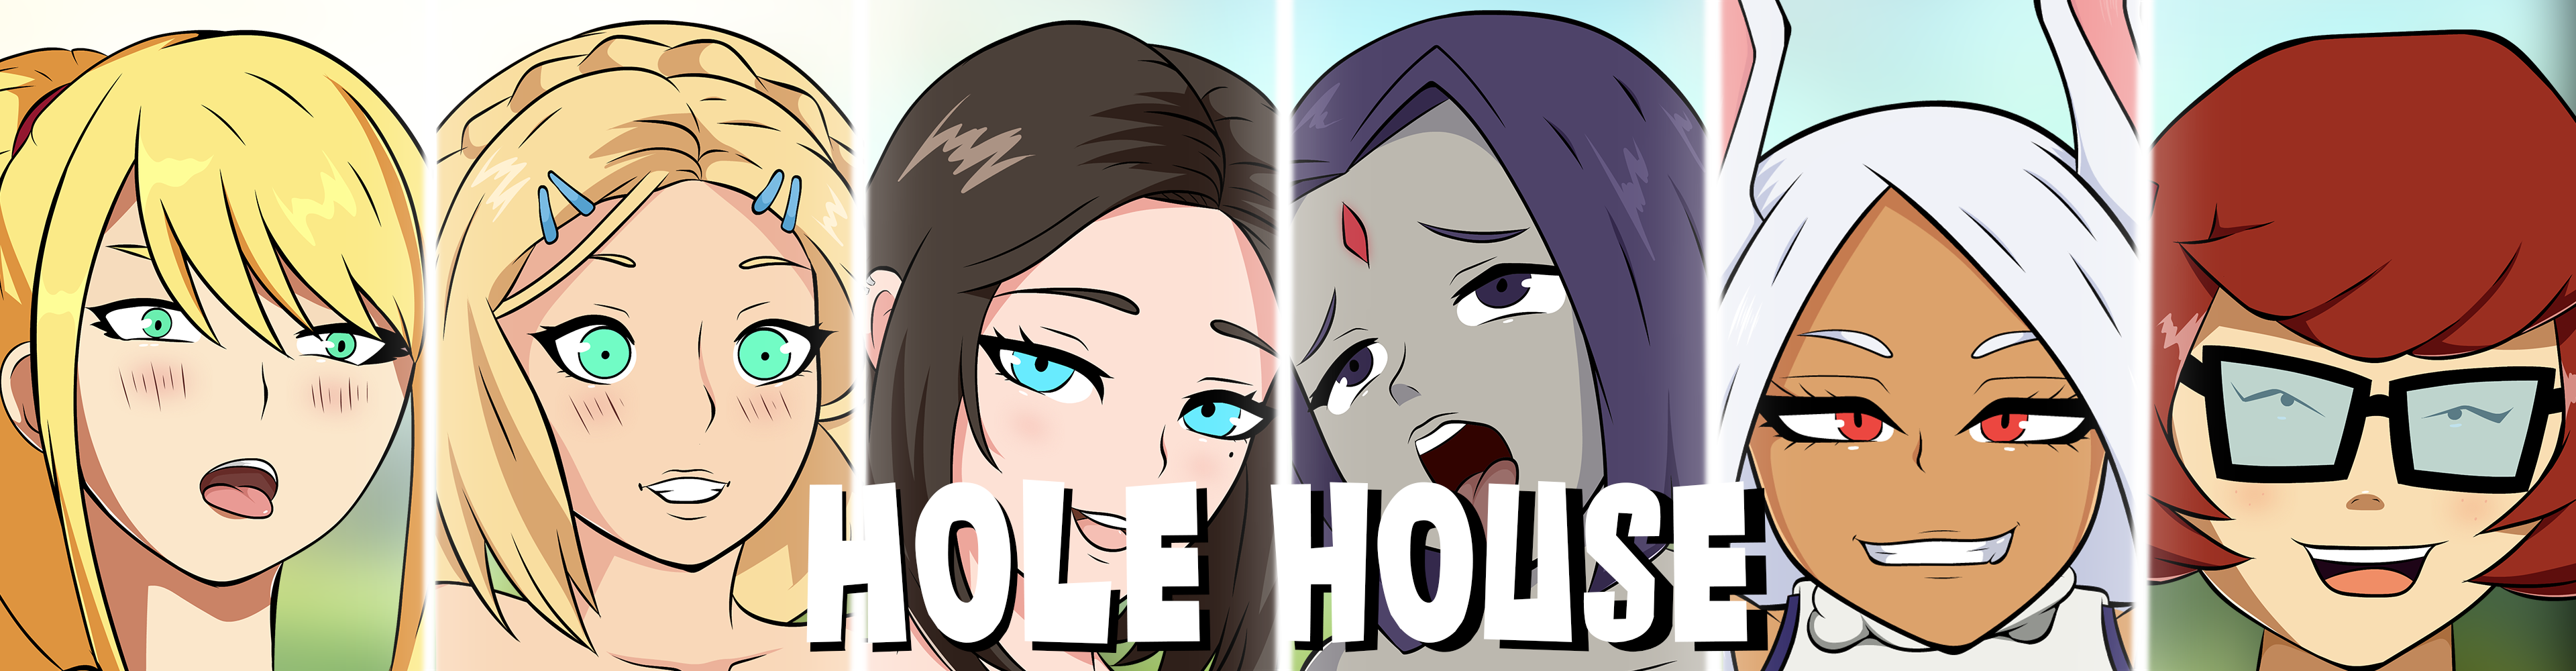 Hole house games